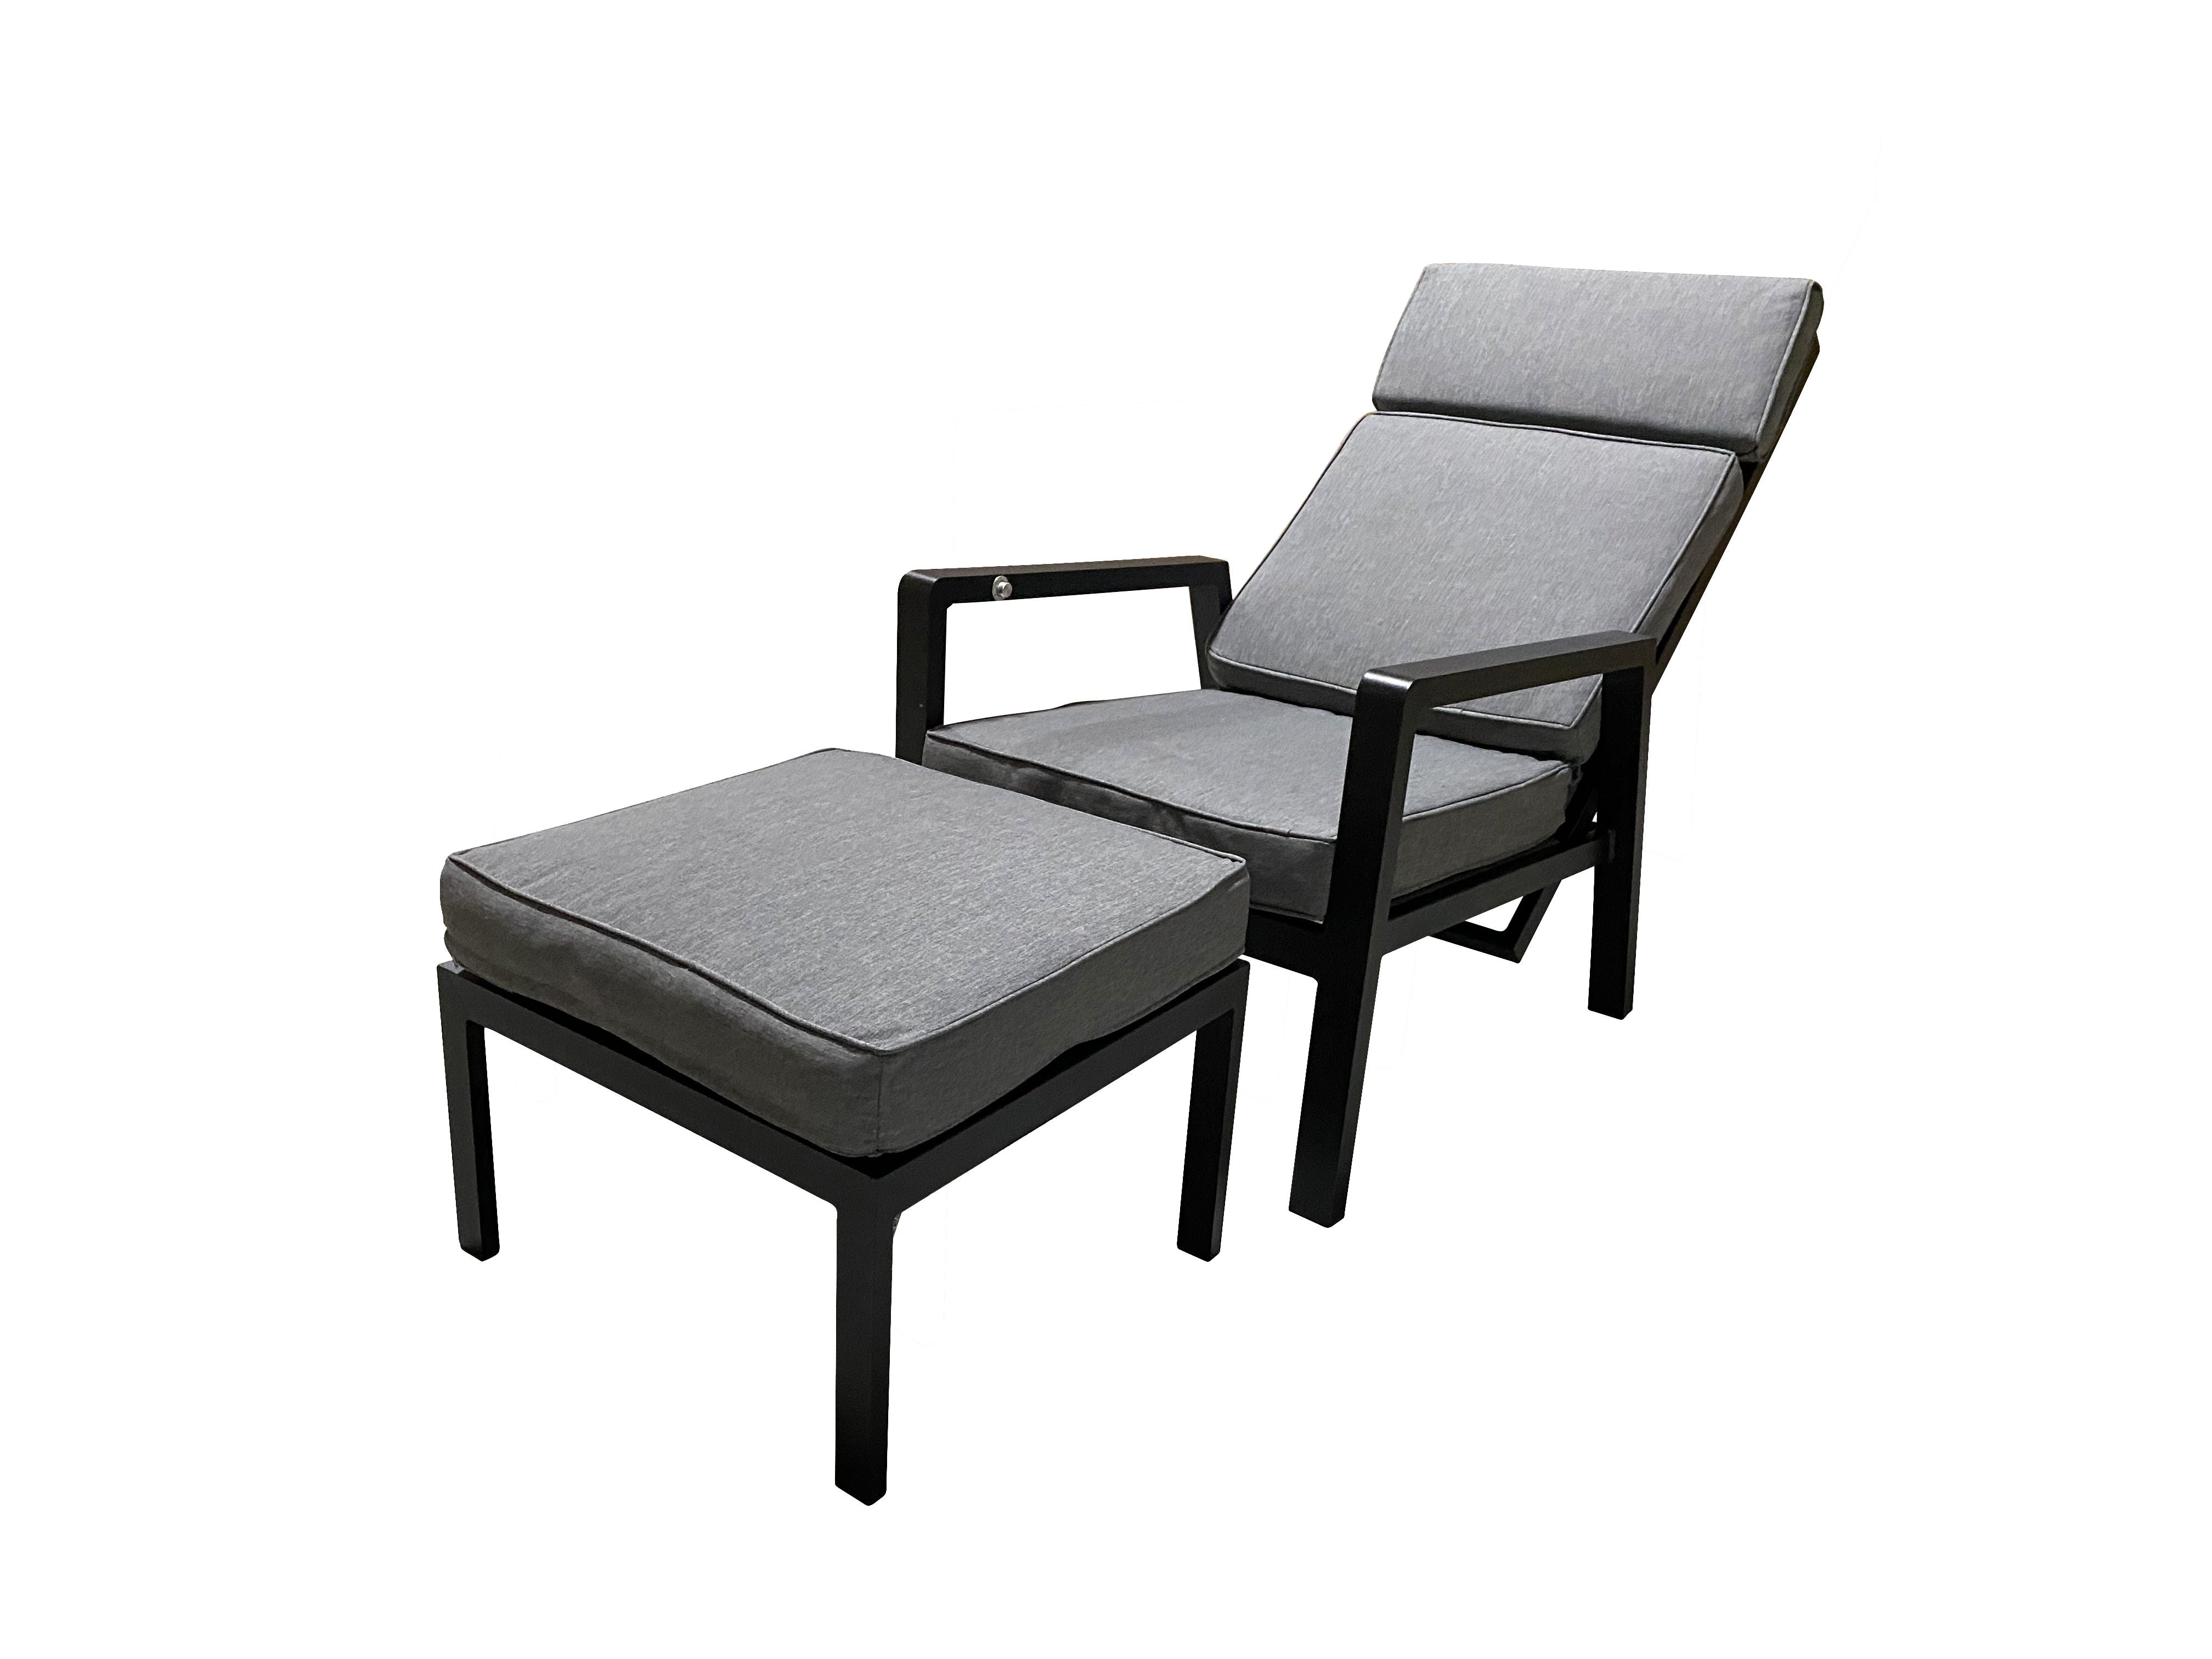 PatioZone Reclining Chair Set with 3" Olefin Cushions and Aluminum Frame (MOSS-0903N) - Black / Grey